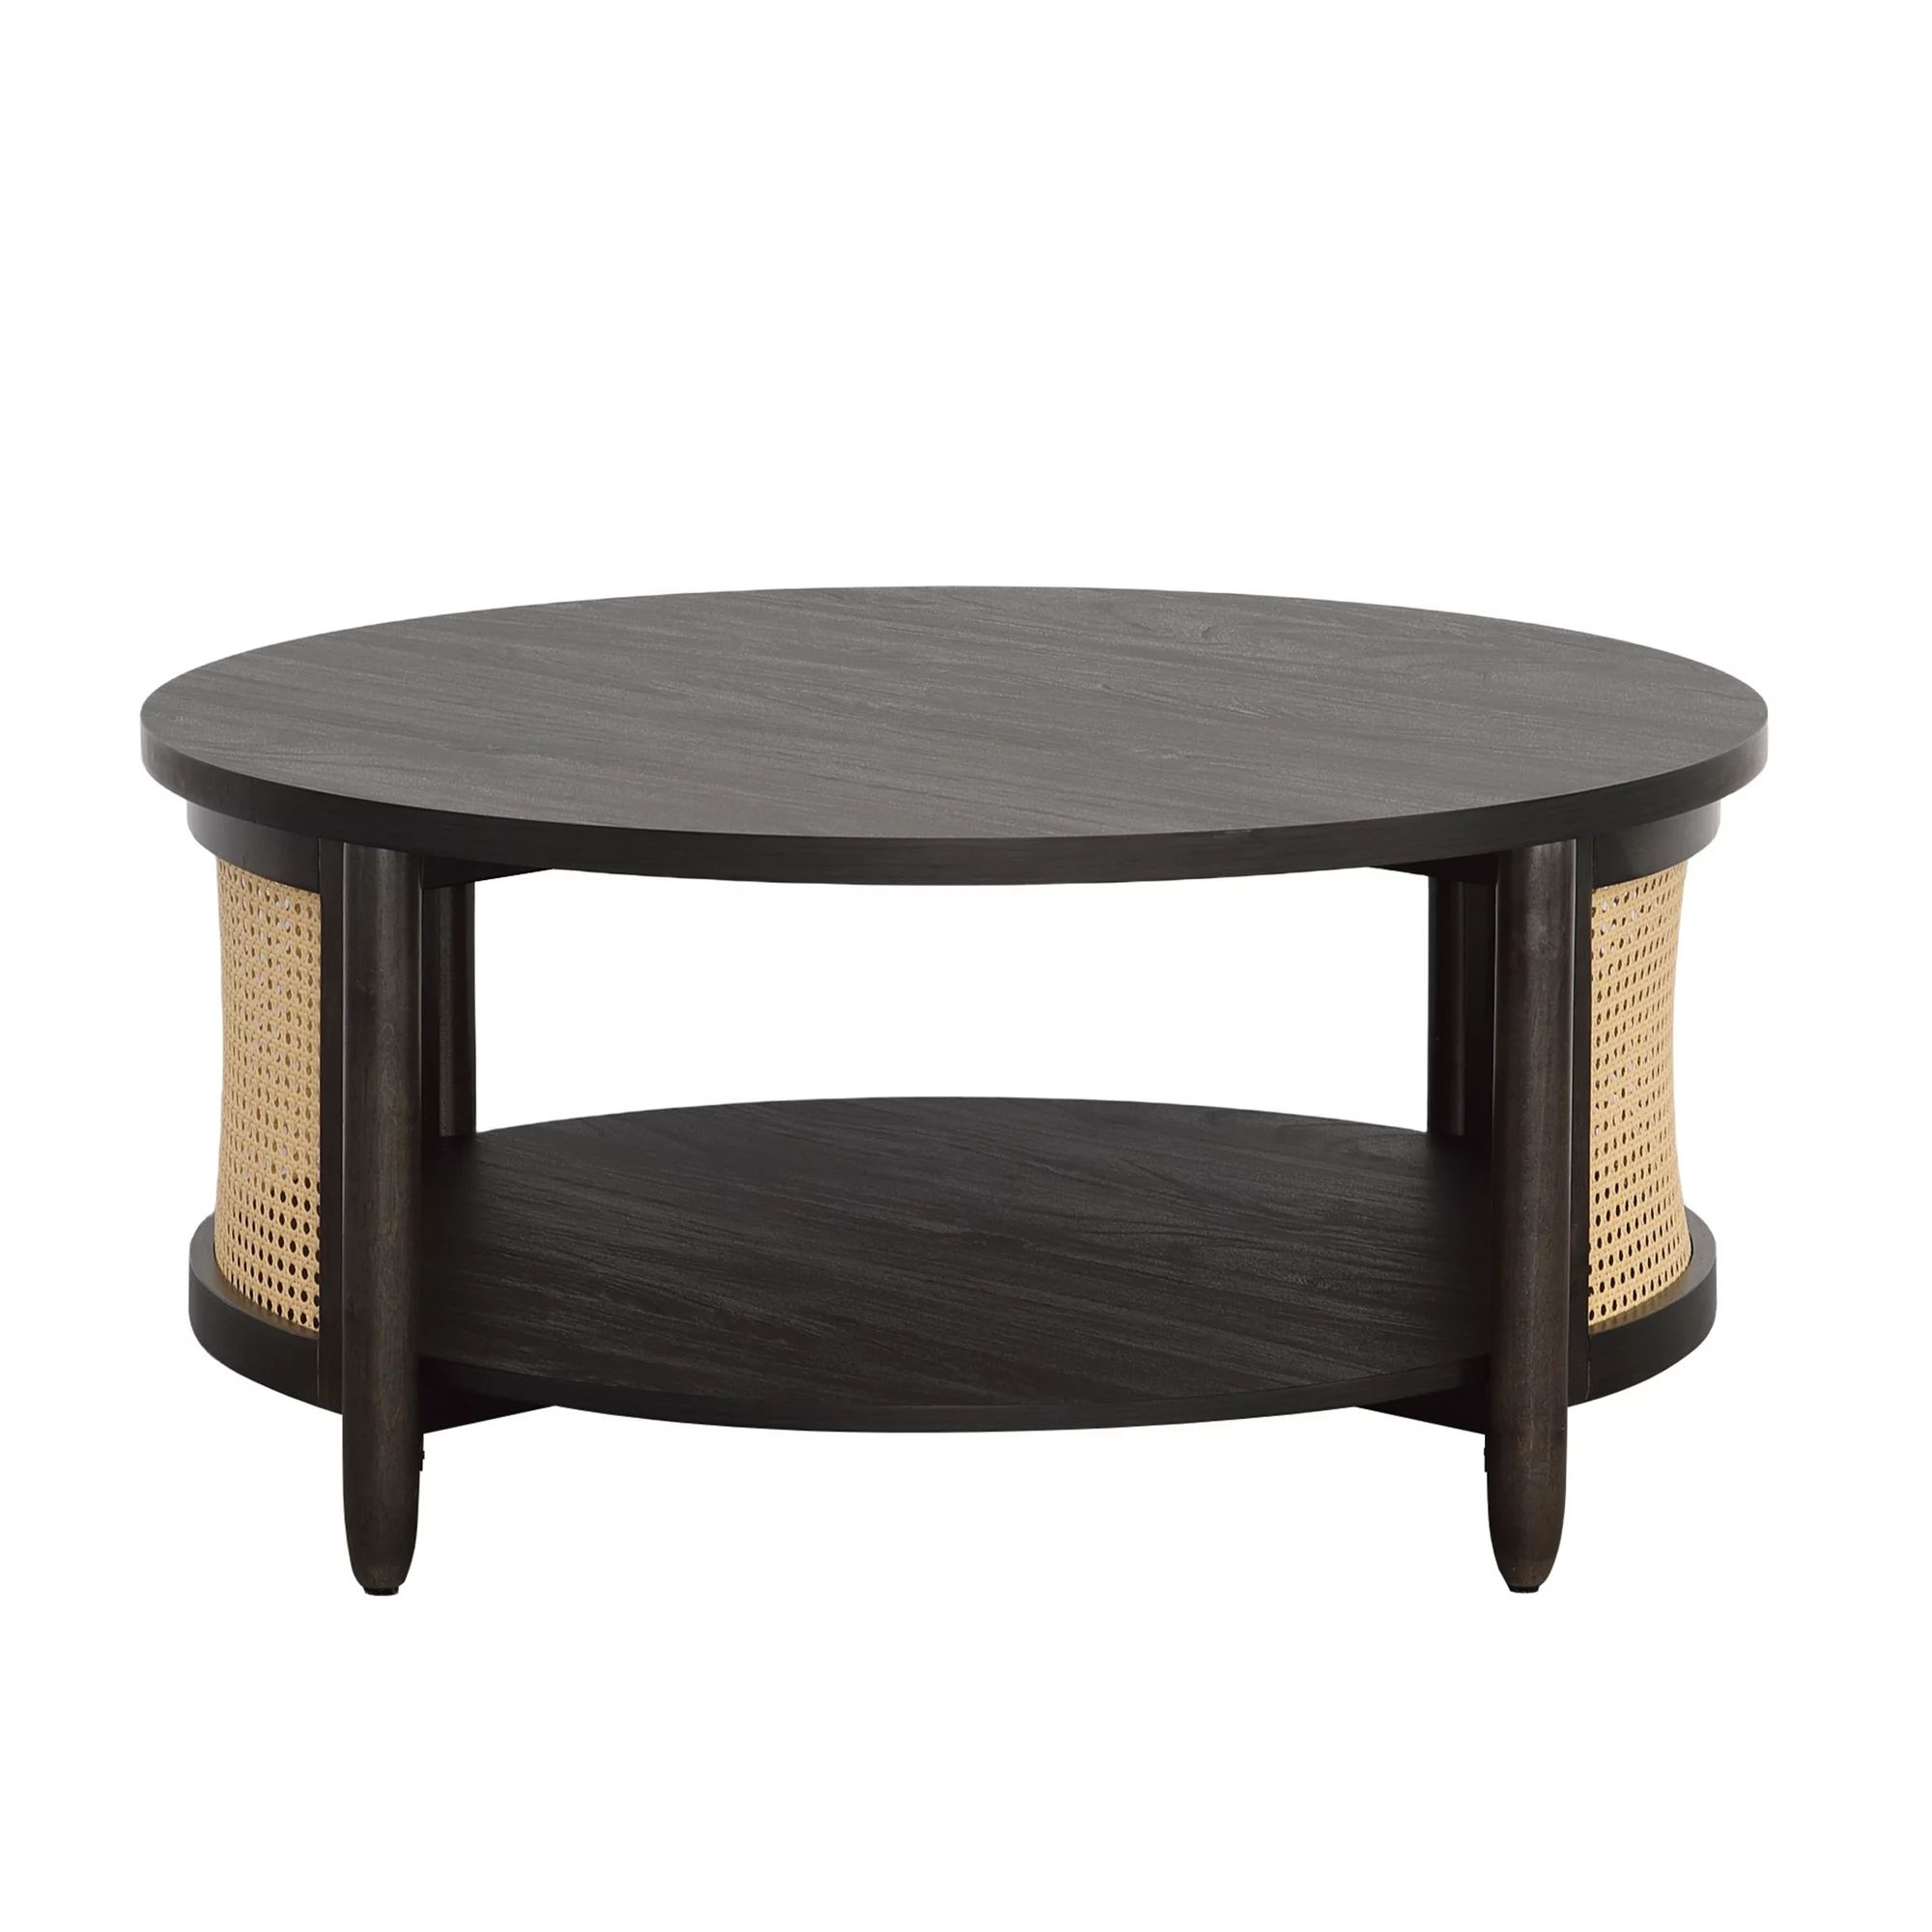 Better Homes & Gardens Springwood Caning Coffee Table, Charcoal Finish | Walmart (US)